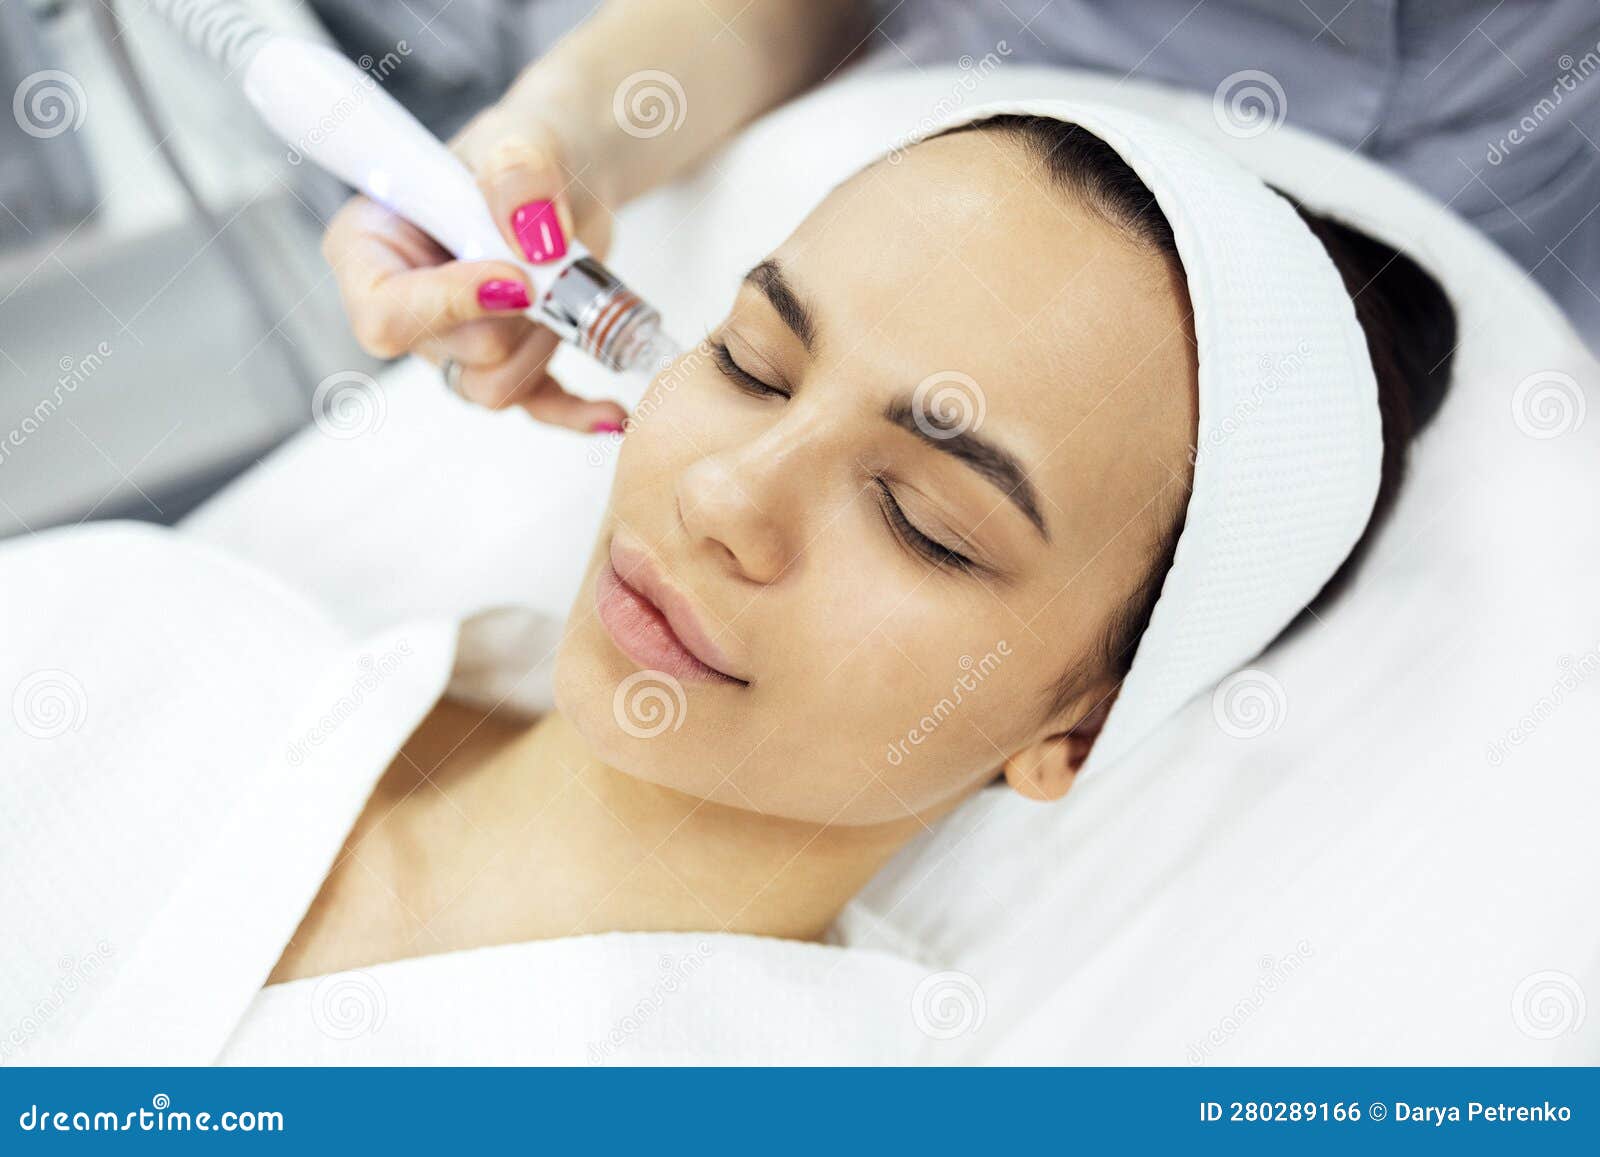 brunette young woman undergoes a procedure of vitamin peeling